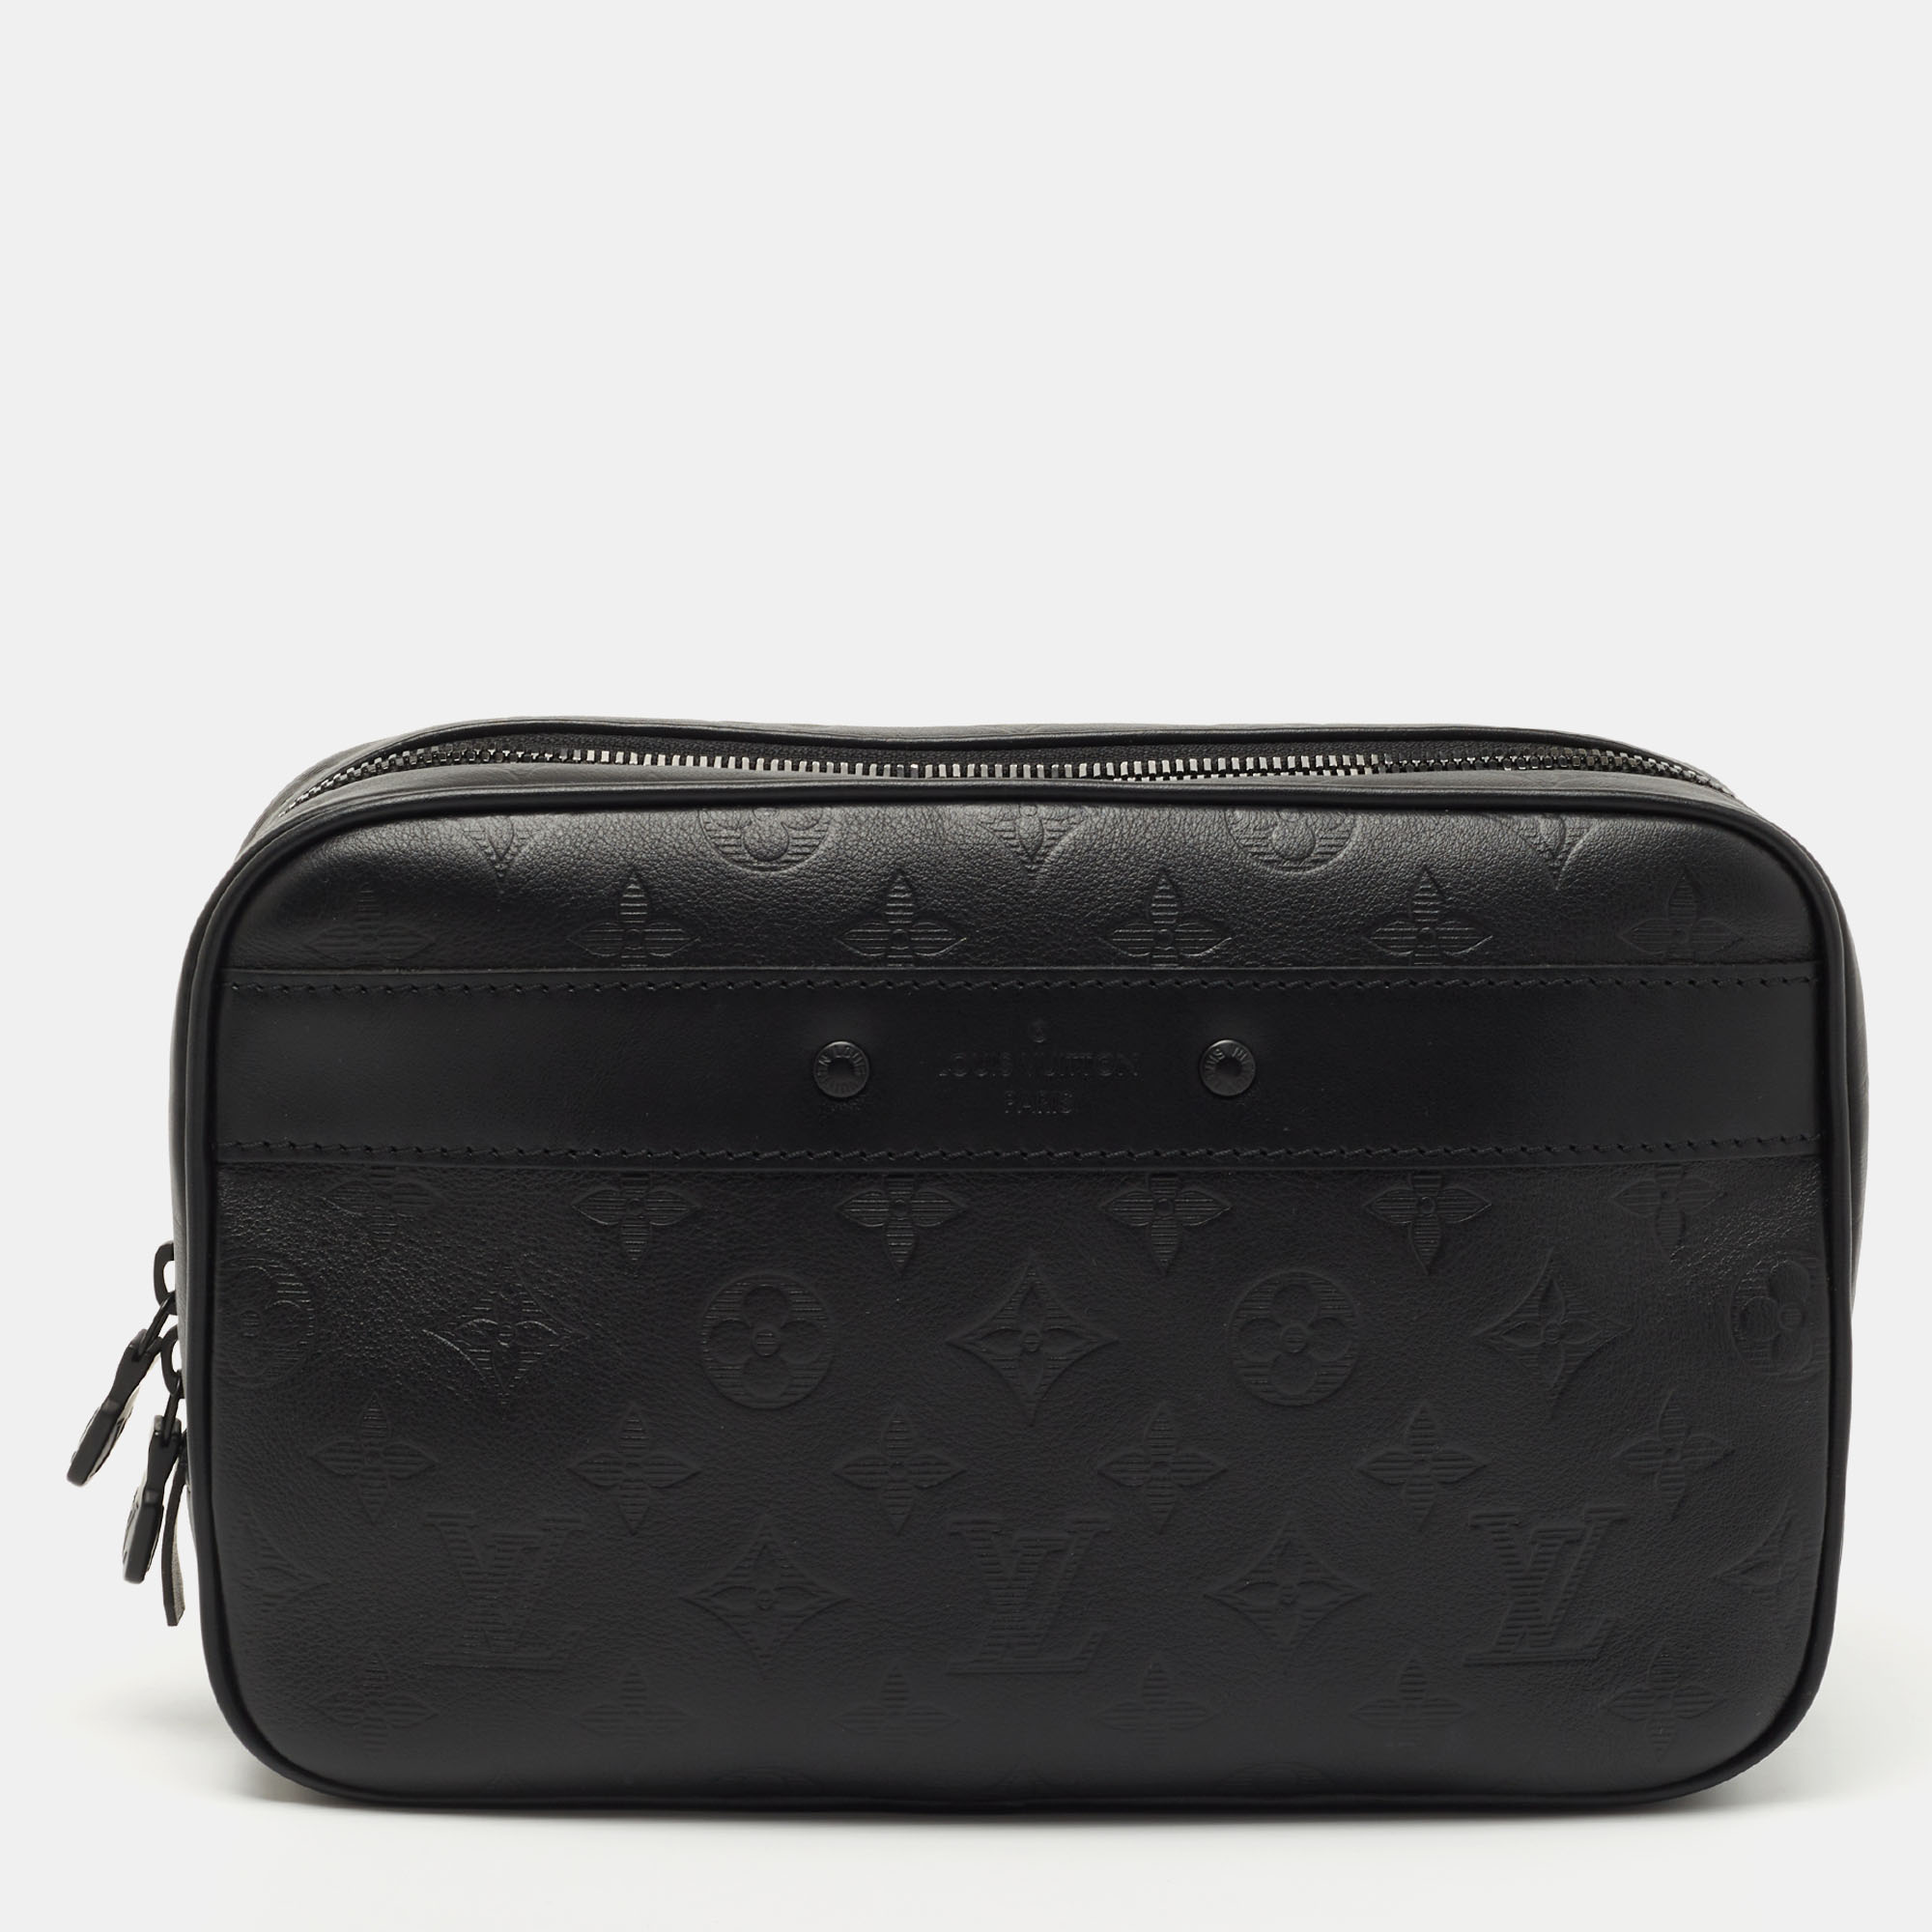 Pre-owned Louis Vuitton Black Monogram Leather Toiletry Pouch Gm